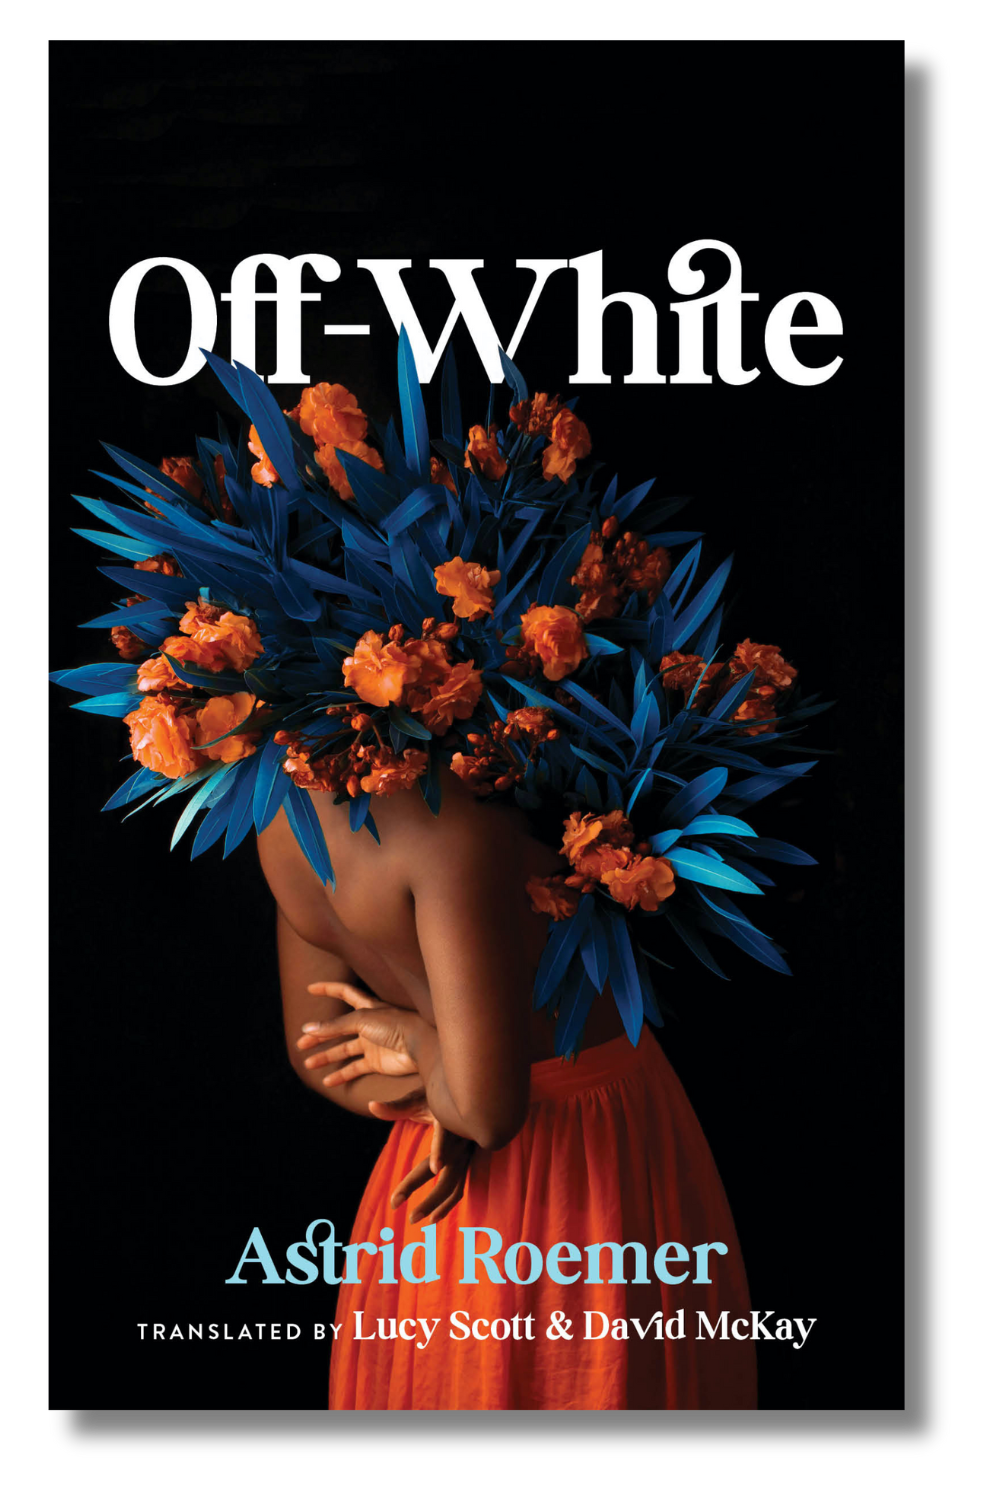 The cover of "Off-White" by Astrid Roemer, tr. Lucy Scott and David McKay